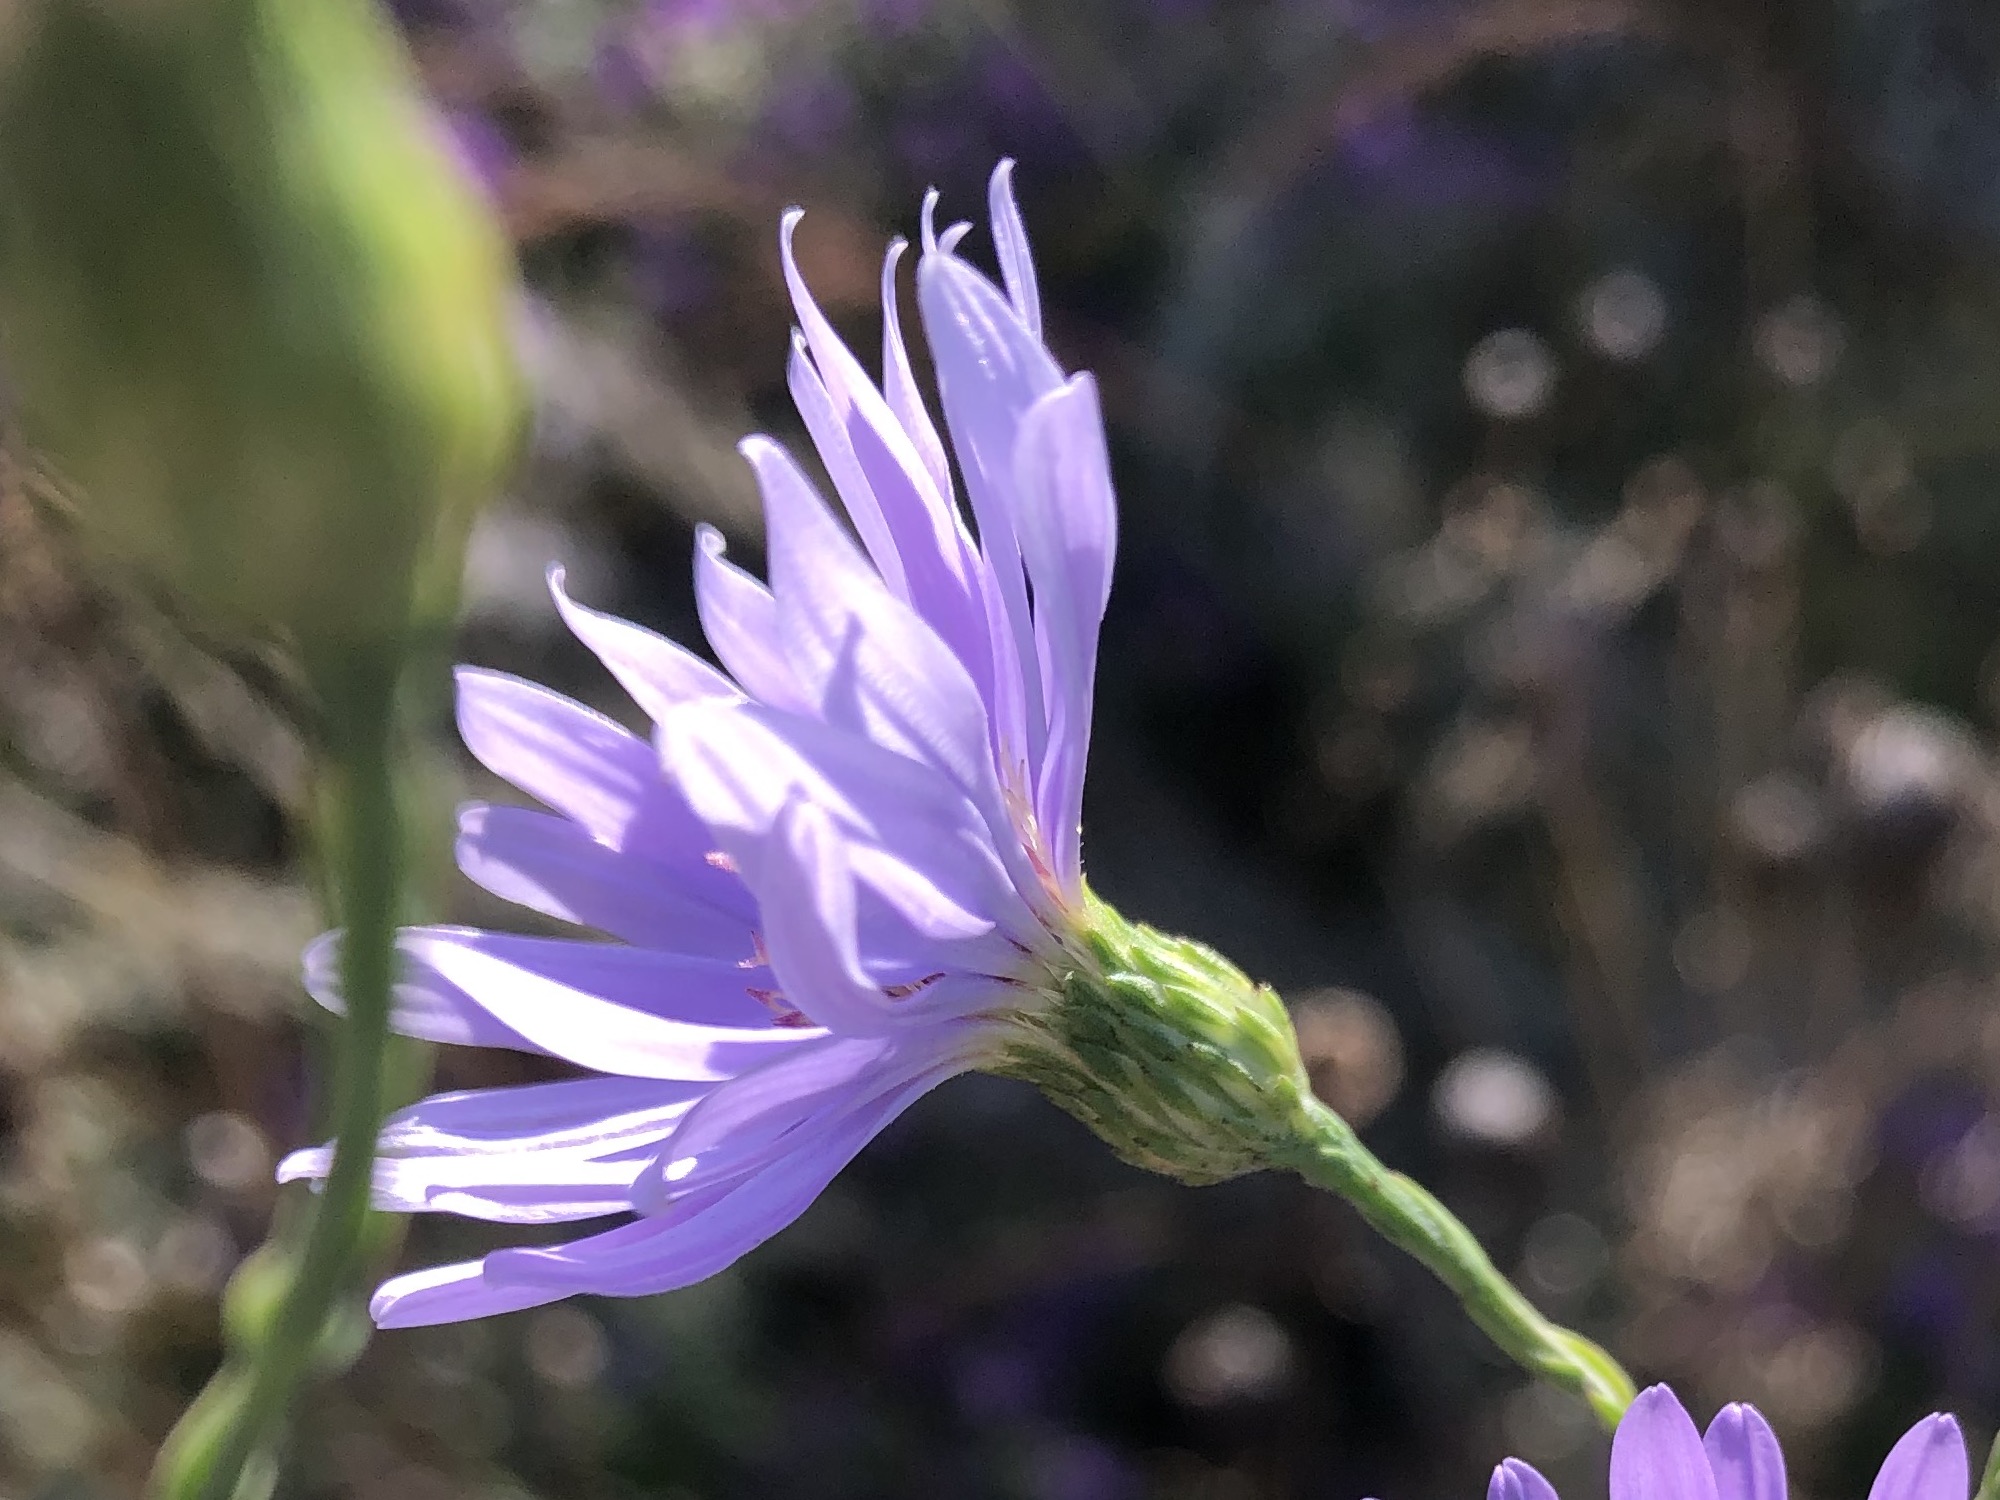 Smooth Blue Aster in UW Arboretum's native gardens in Madison, Wisconsin on September 21, 2021.